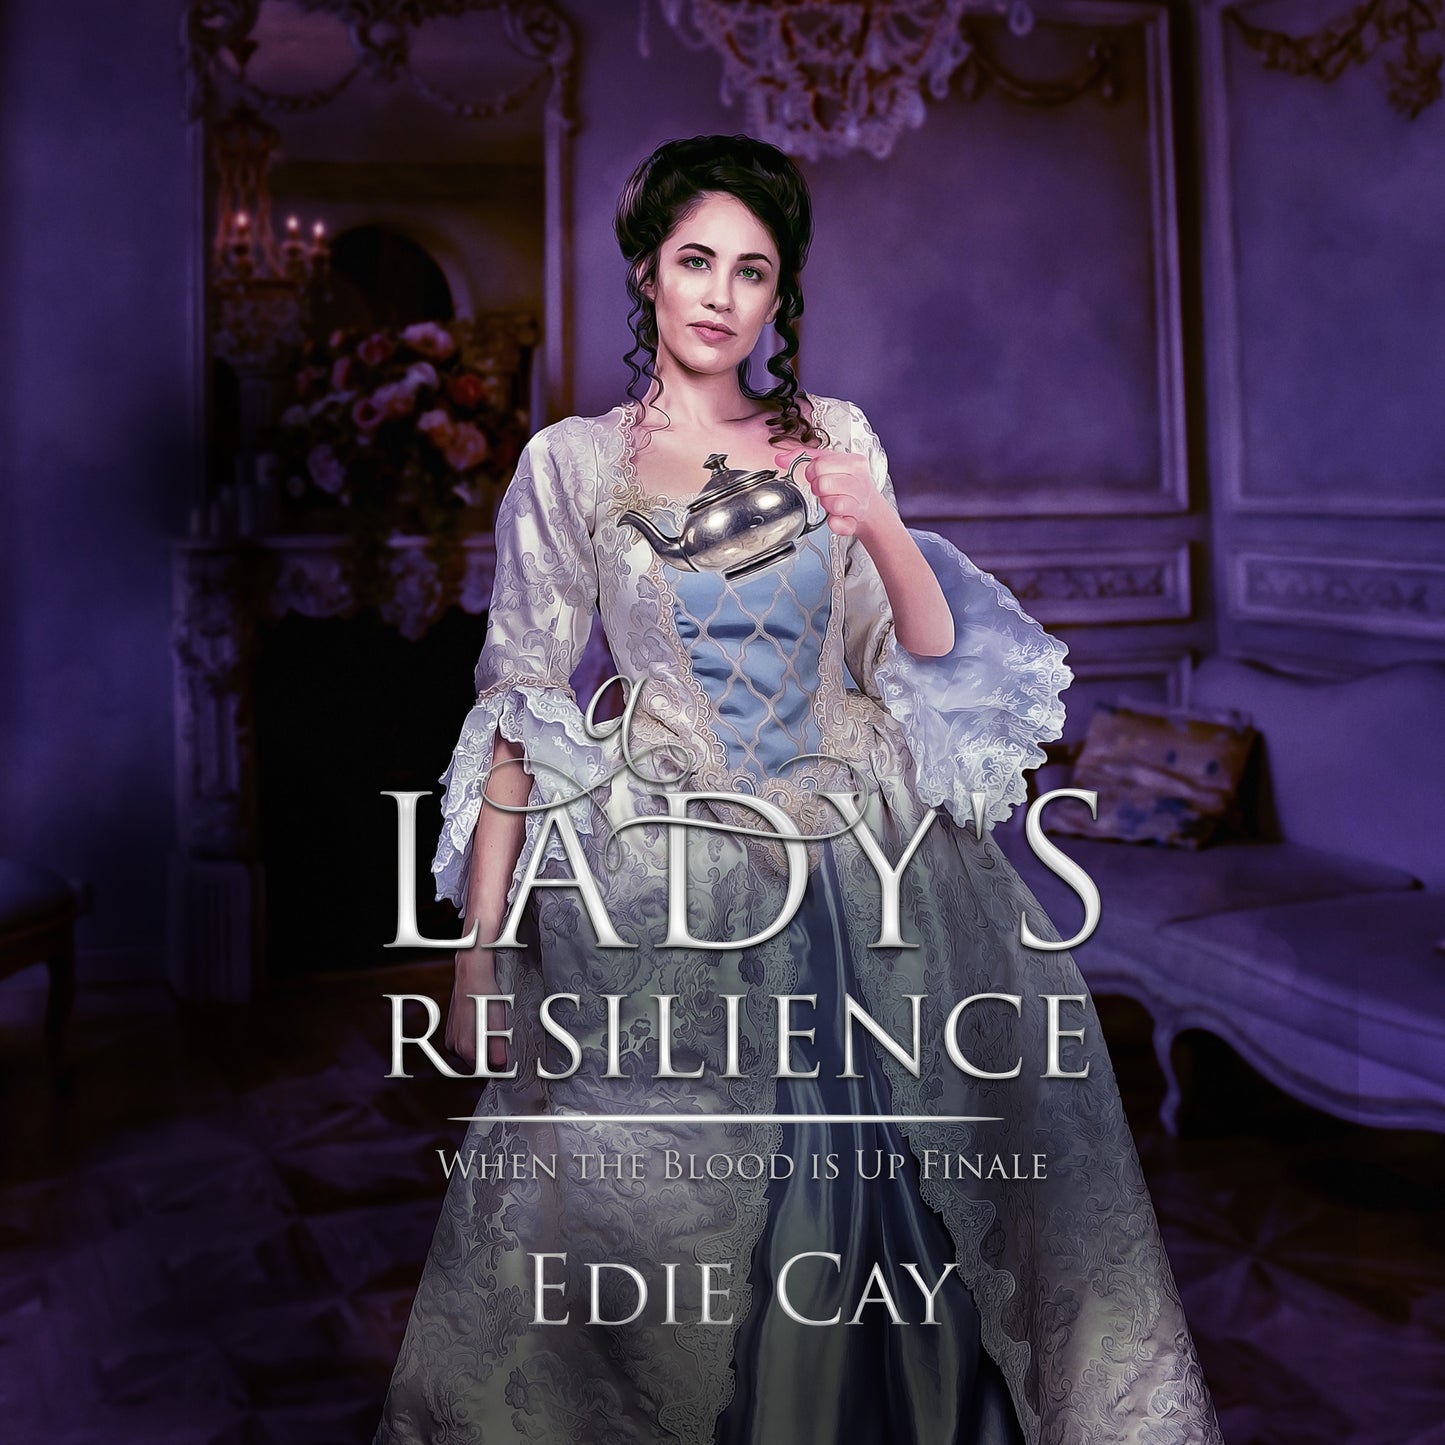 A Lady's Resilience